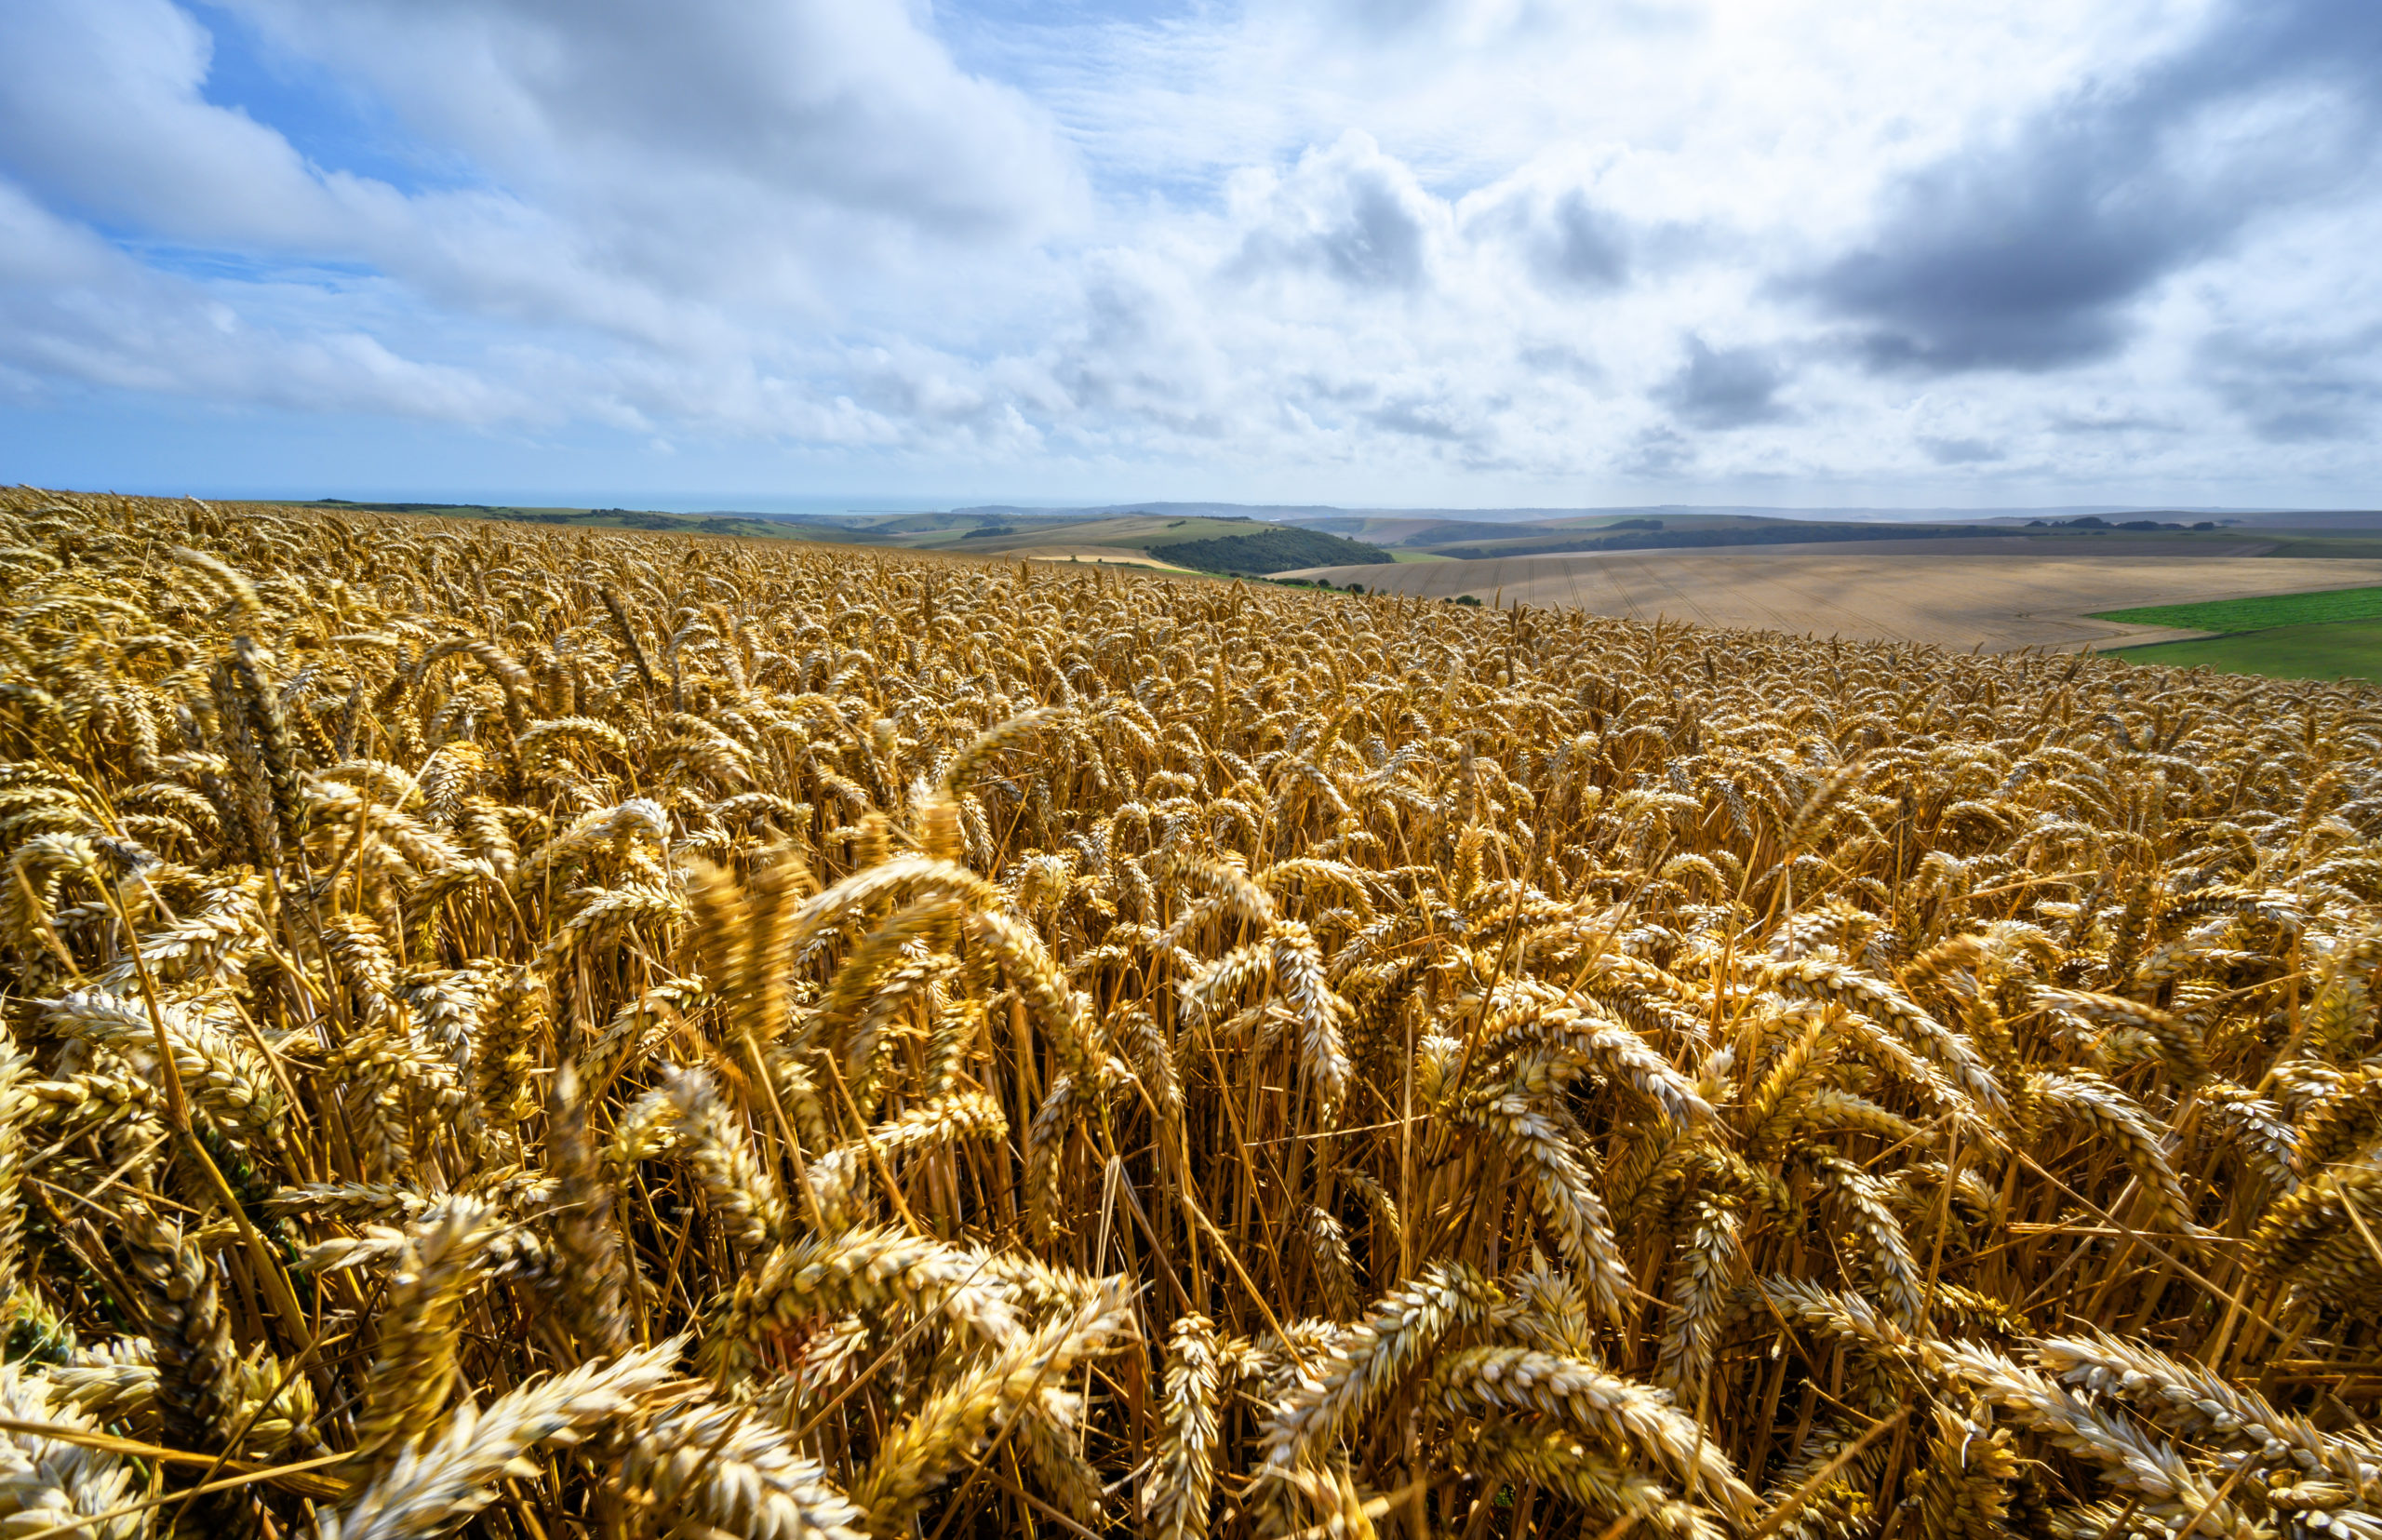 Red Tractor protects UK farmer access to biofuels market 